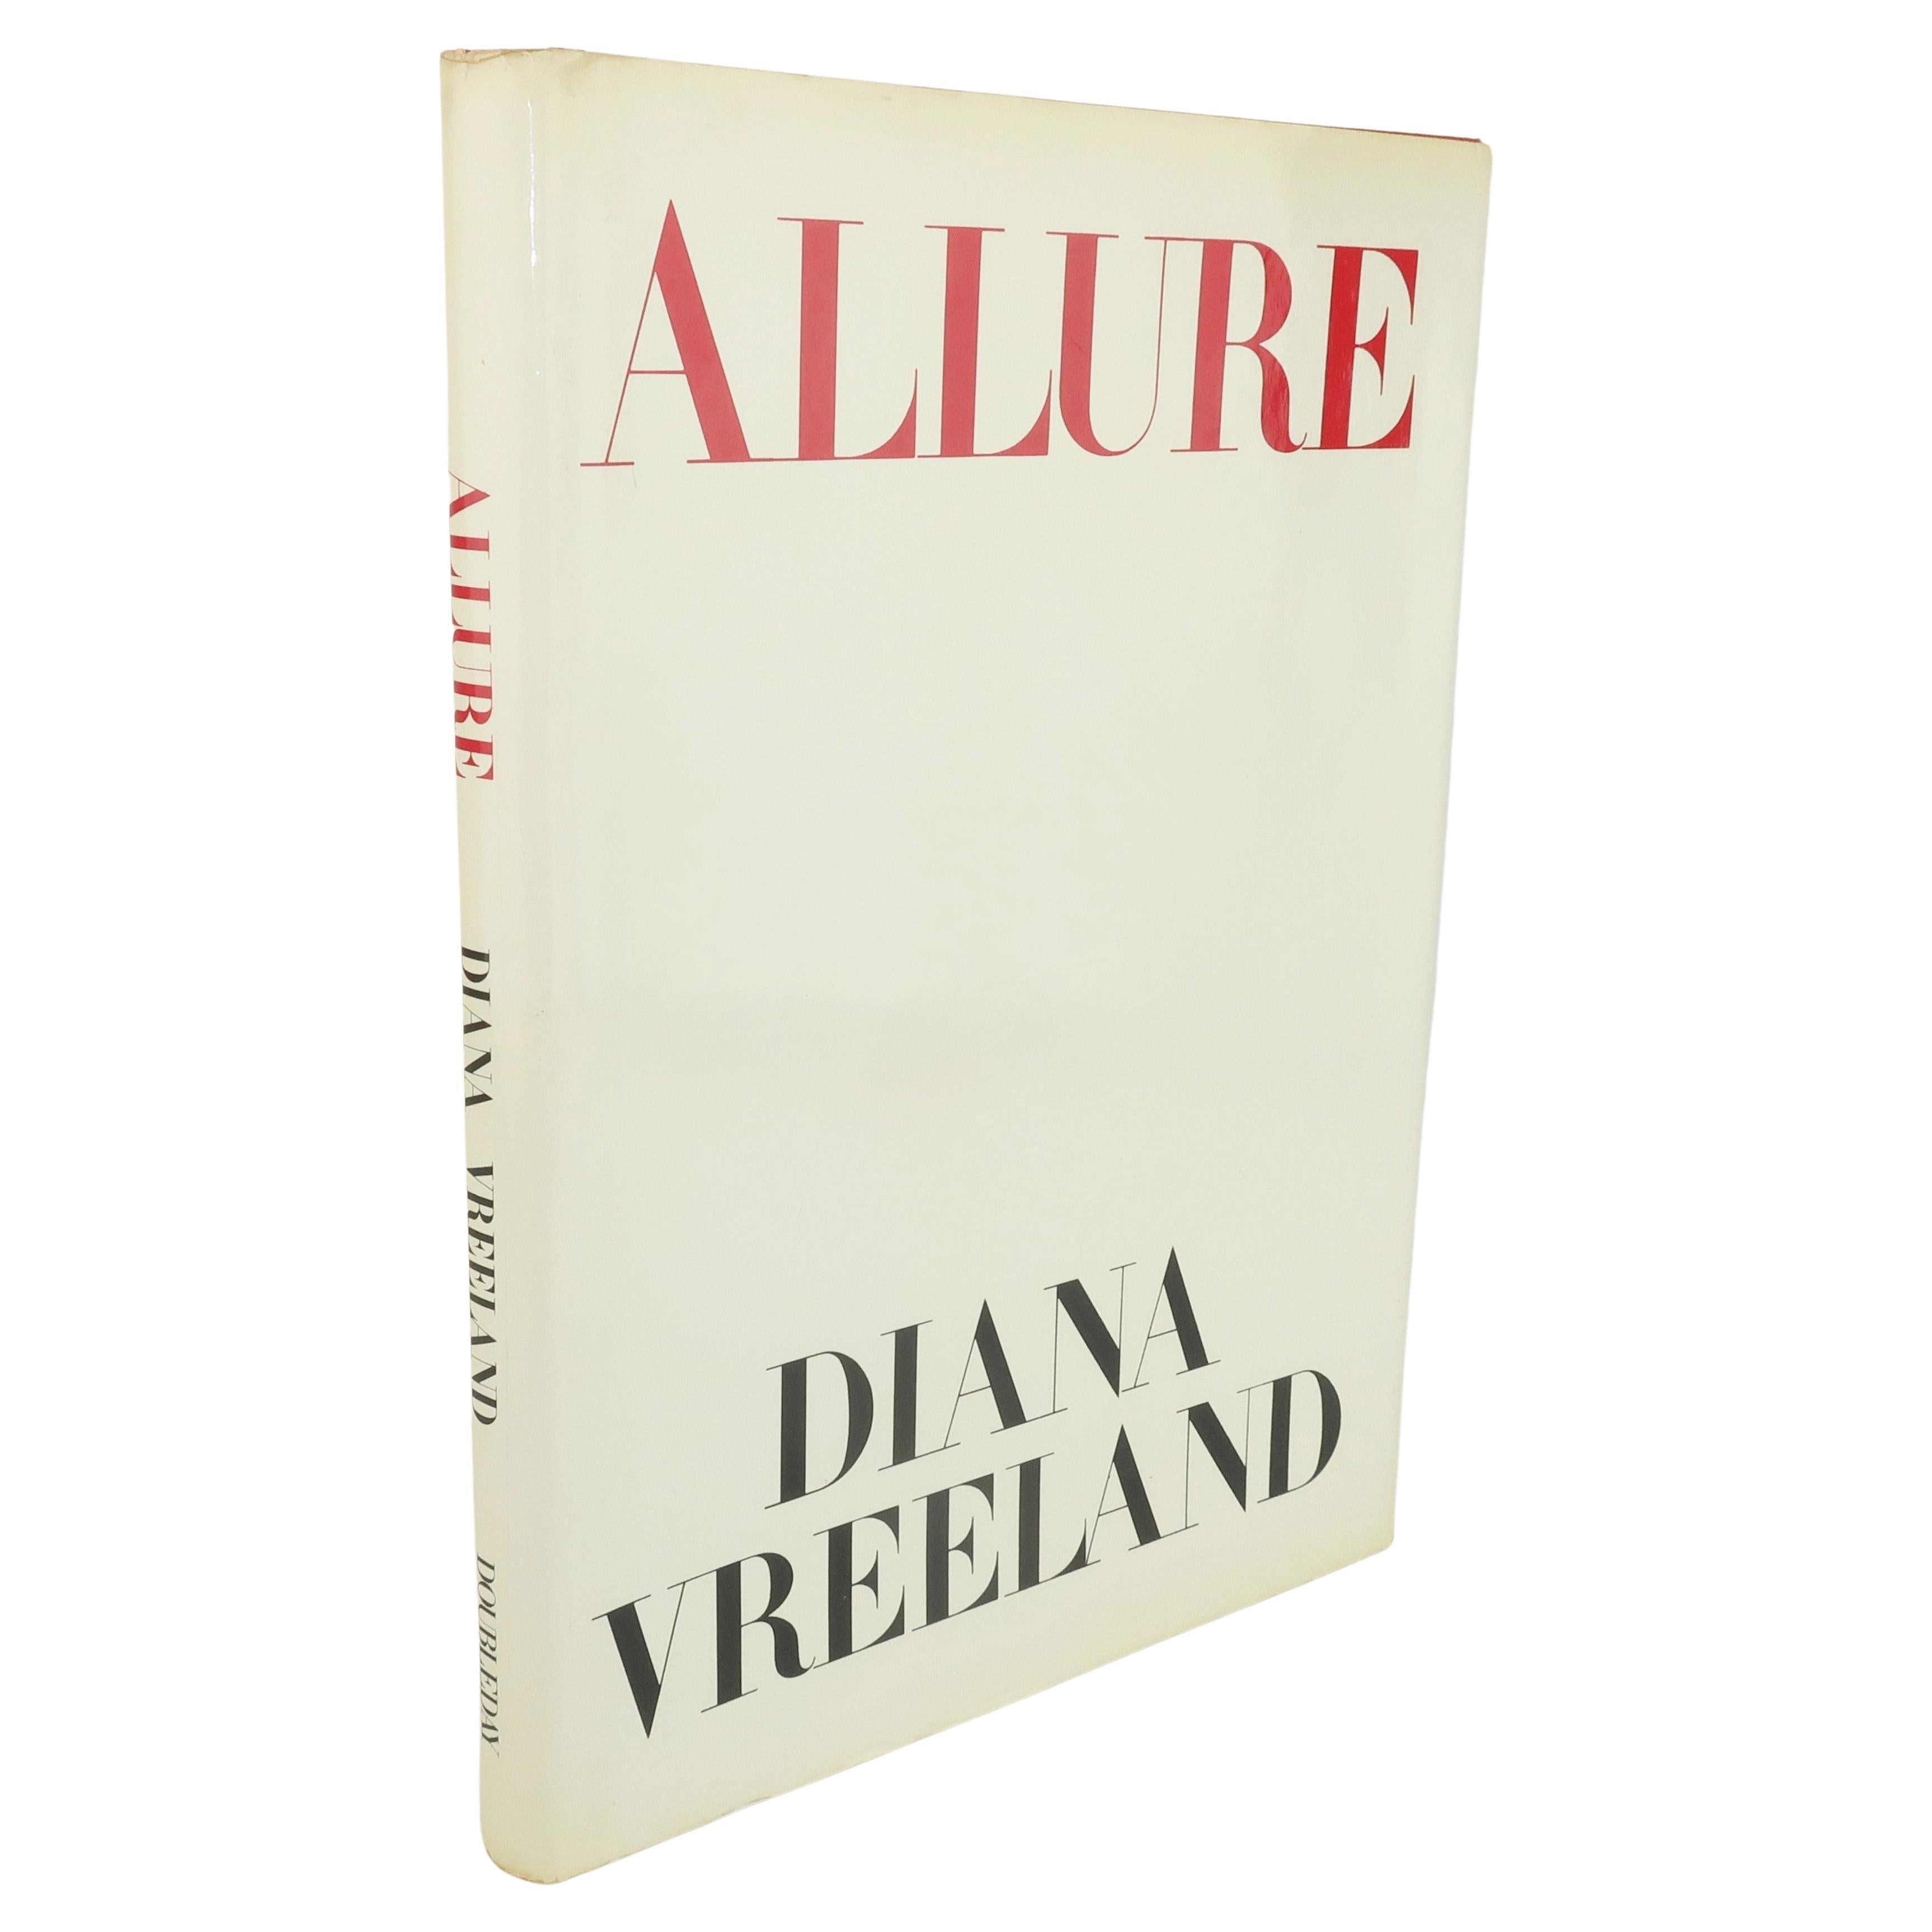 Allure by Diana Vreeland Fashion Photography Coffee Table Book, 1980